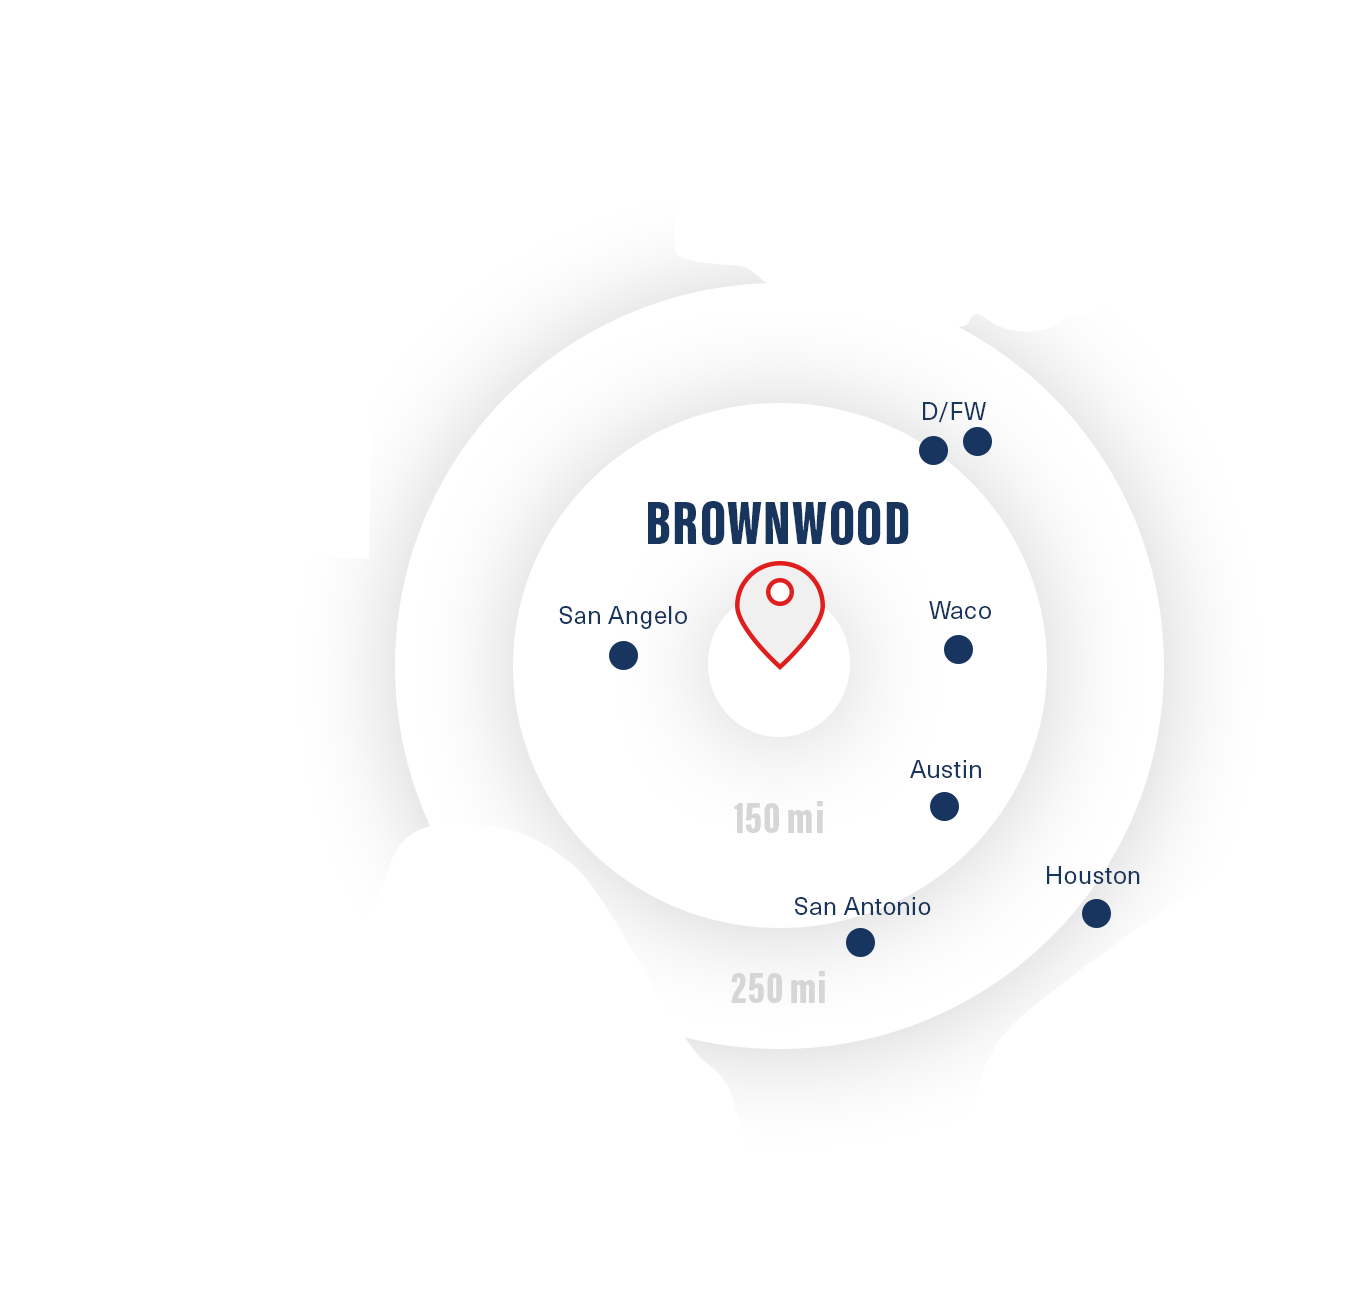 an image of texas with brownwood in the center and radius distances from texas' major cities